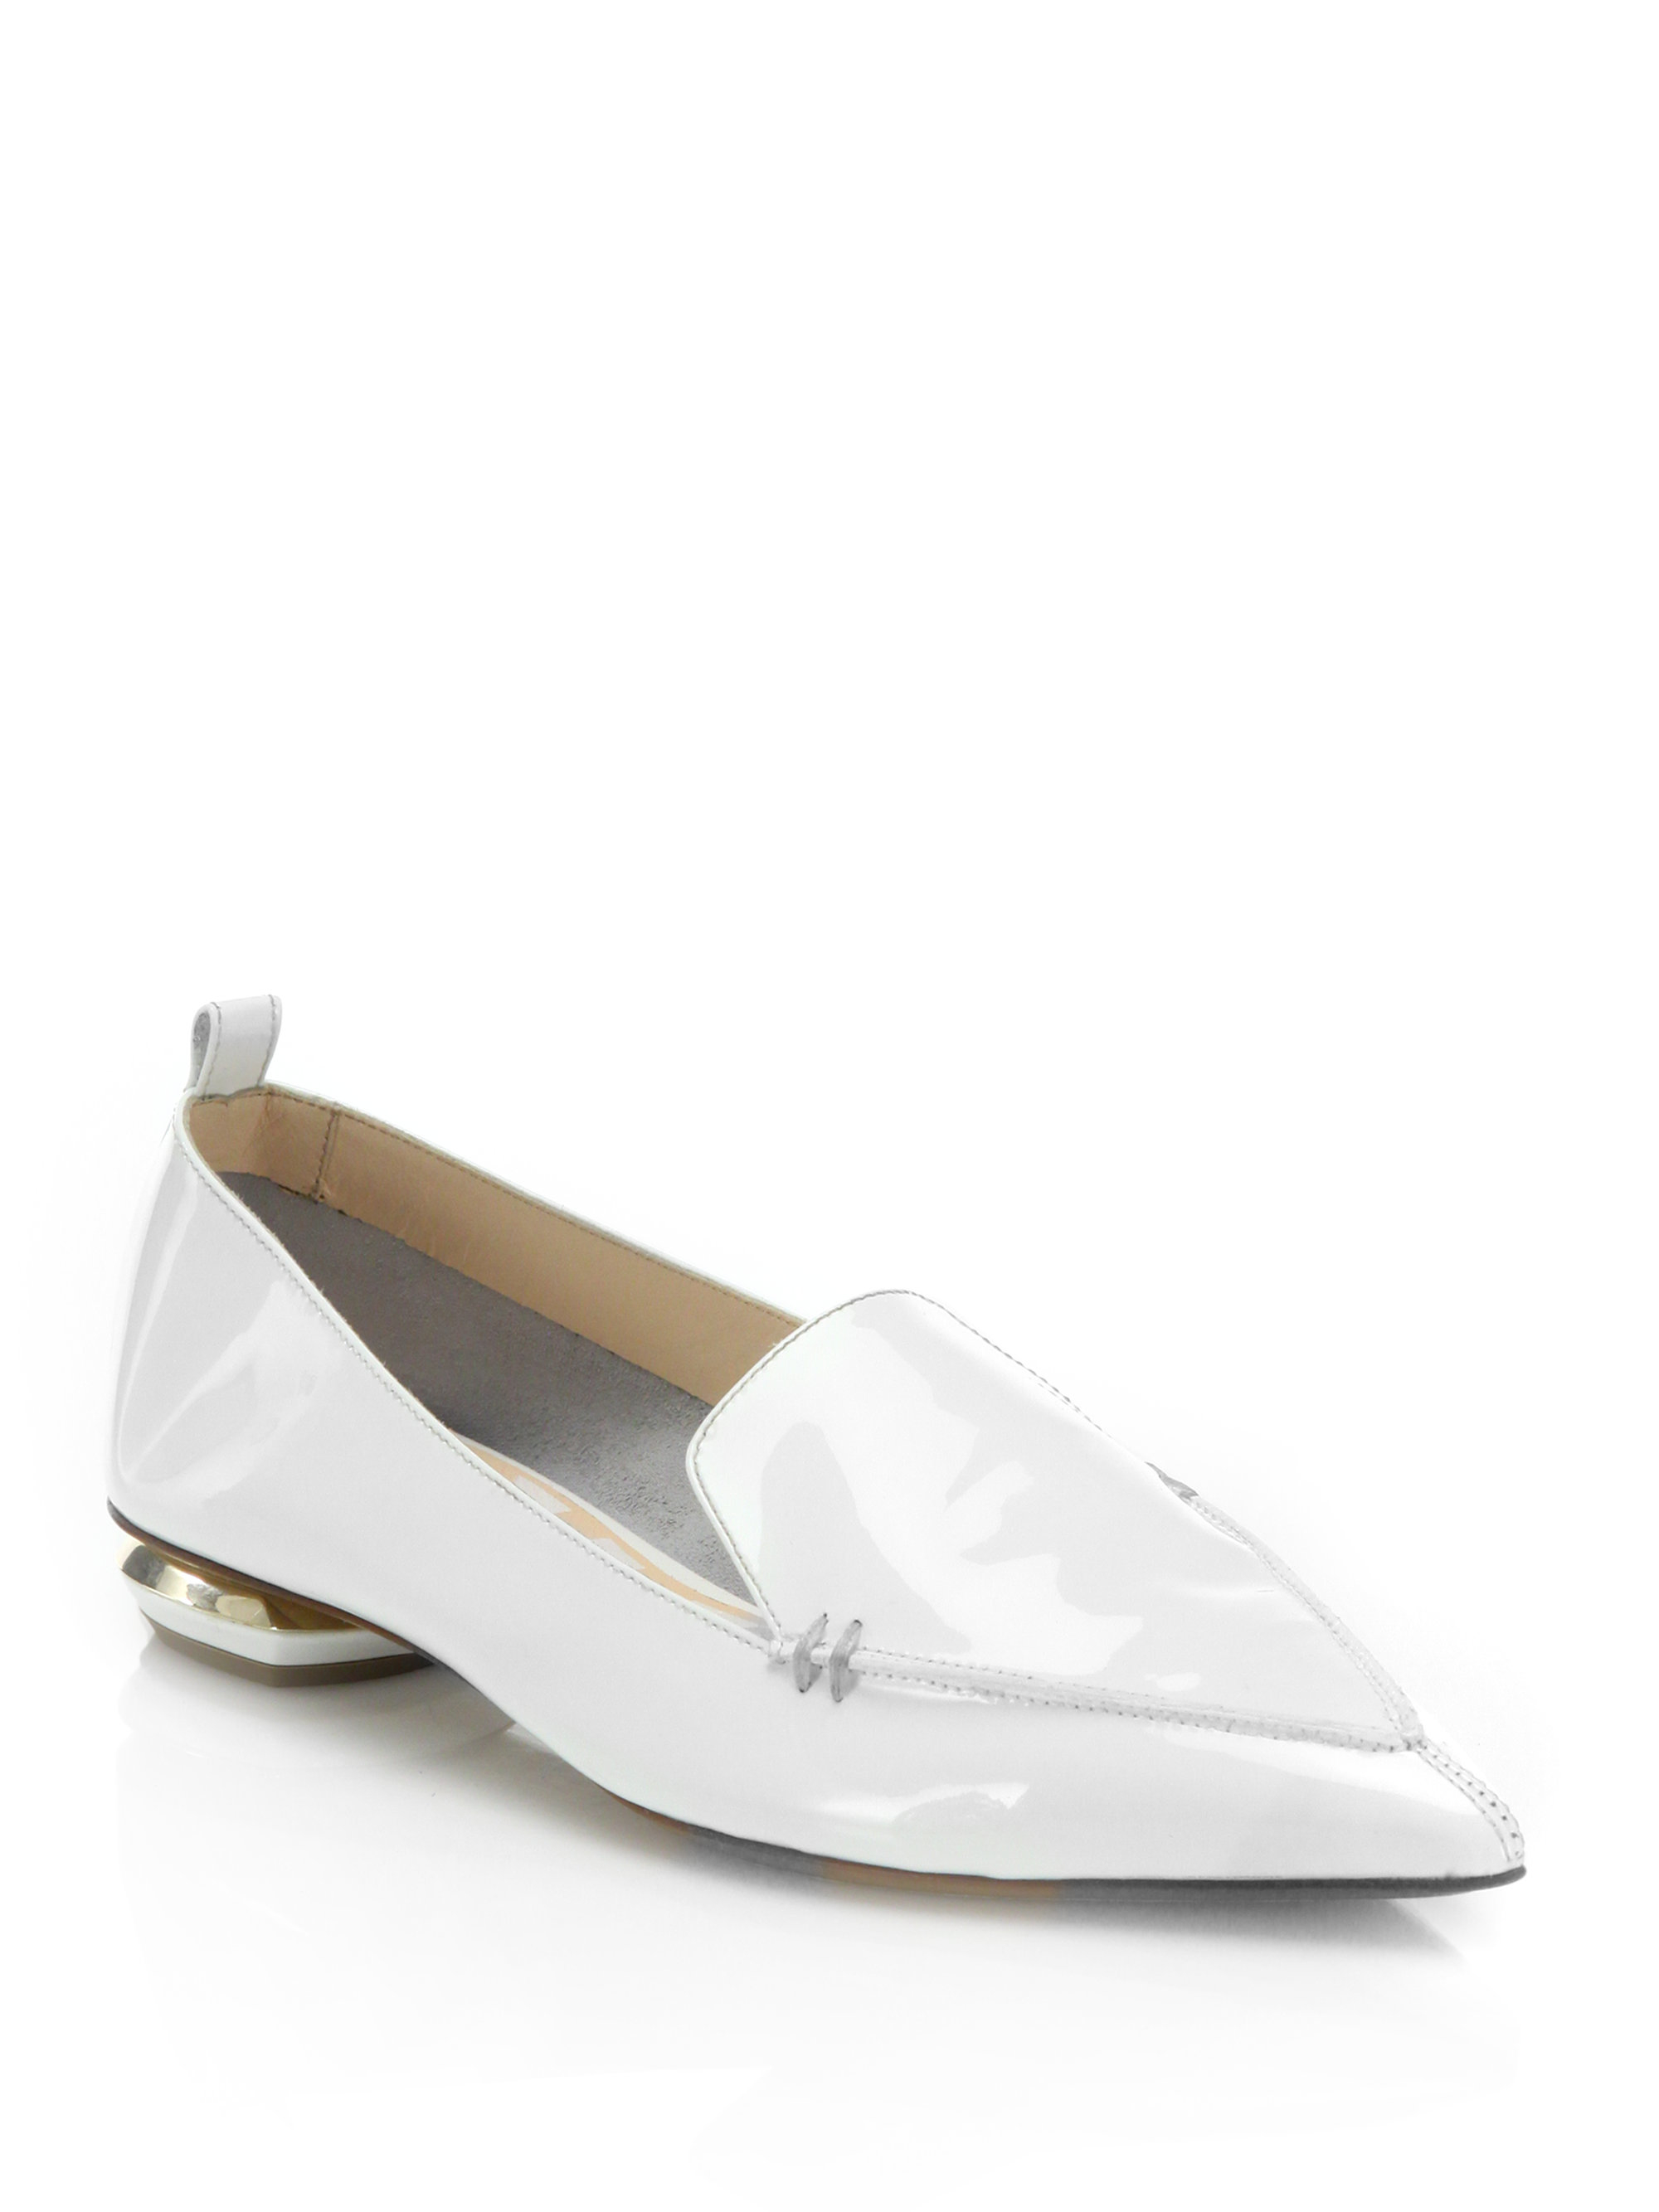 Nicholas kirkwood Beya Patent Leather Loafers in White for Men | Lyst